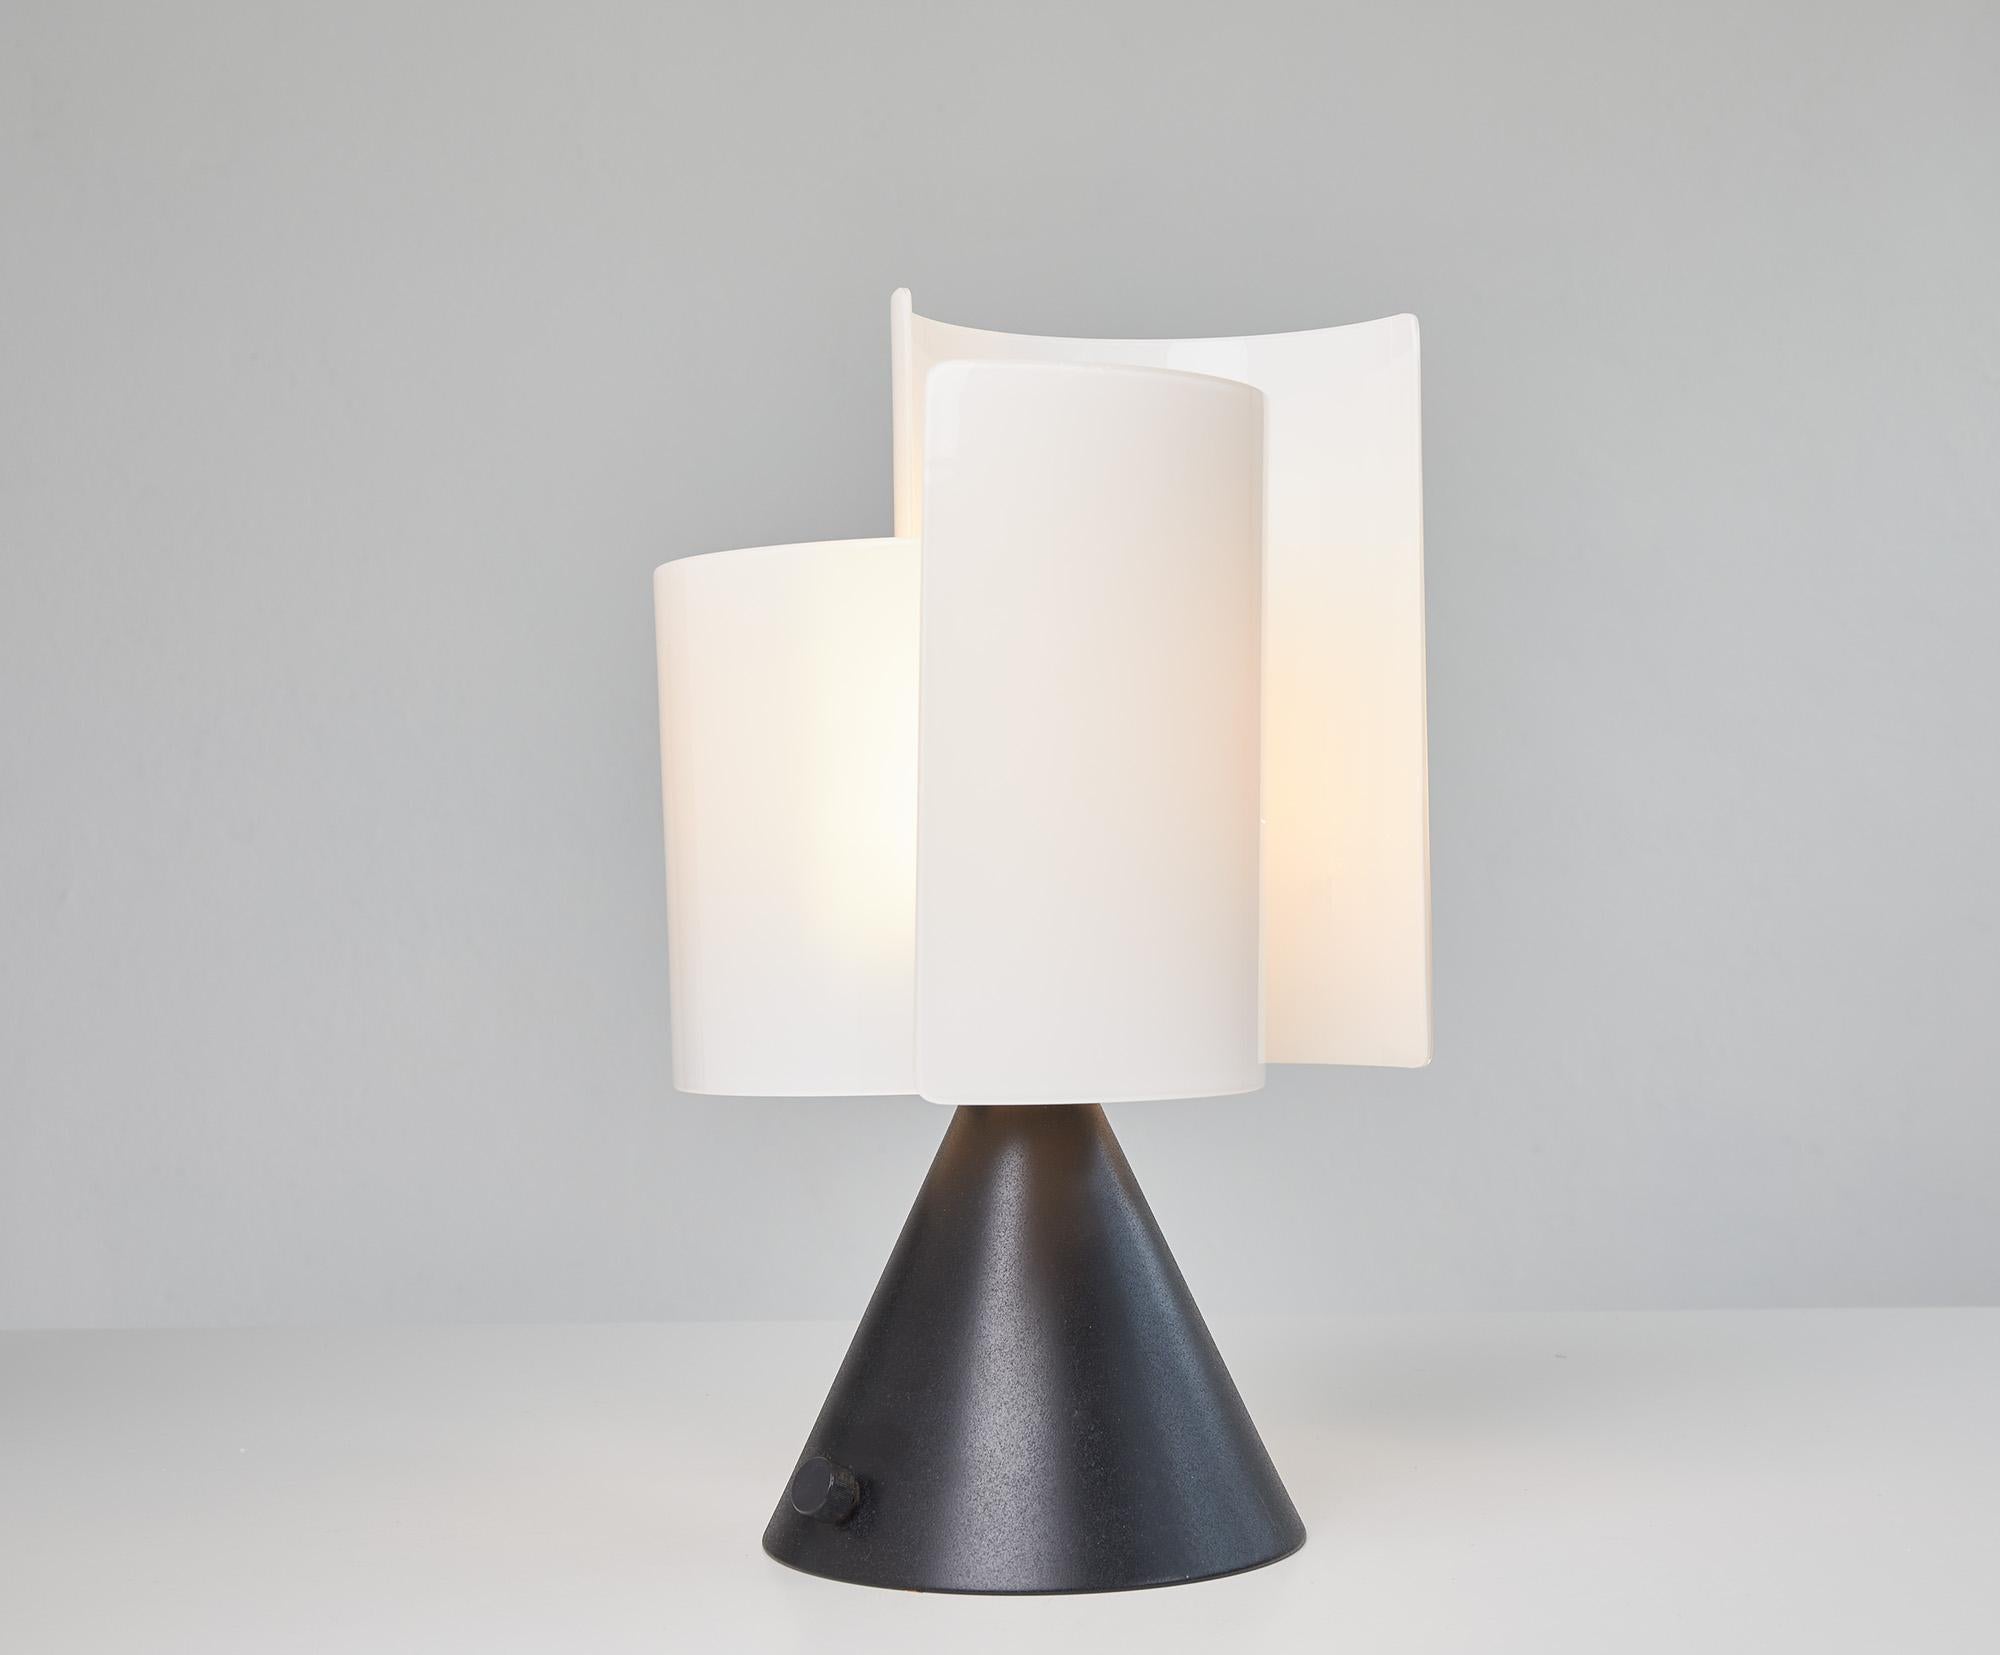 Table lamp in white Murano glass, Ed. de Mayo, Italy 1980

This amazing and rare lamp is made up of three curved leaves of different sizes in white glass and a conical black metal base with the original integrated dimmer switch.

A real light